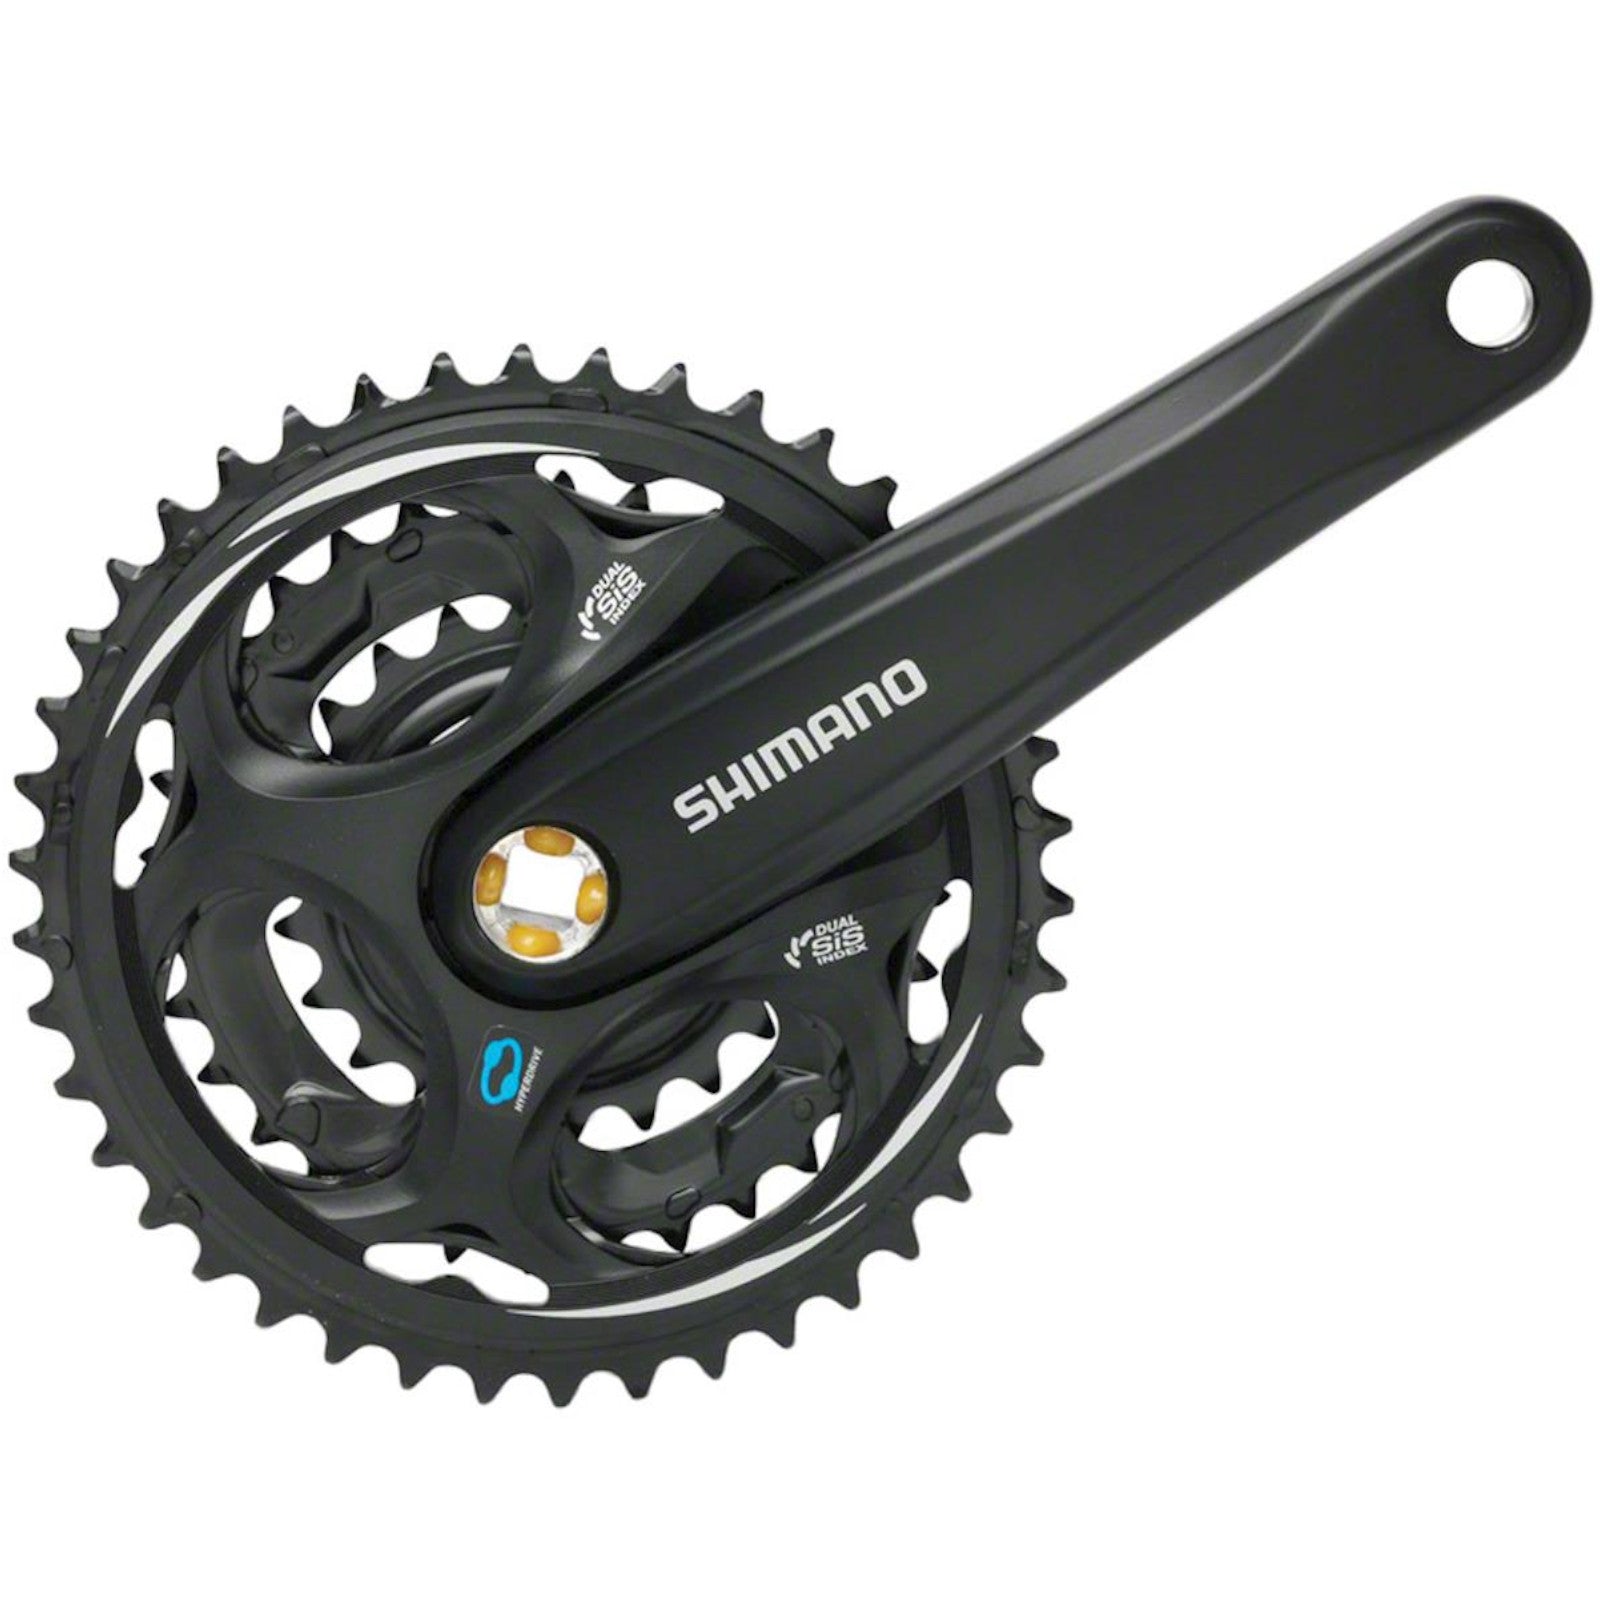 Shimano Chainset Altus M311 MTB Square Taper without Chainguard 48/38/28T 170mm Alternate 1